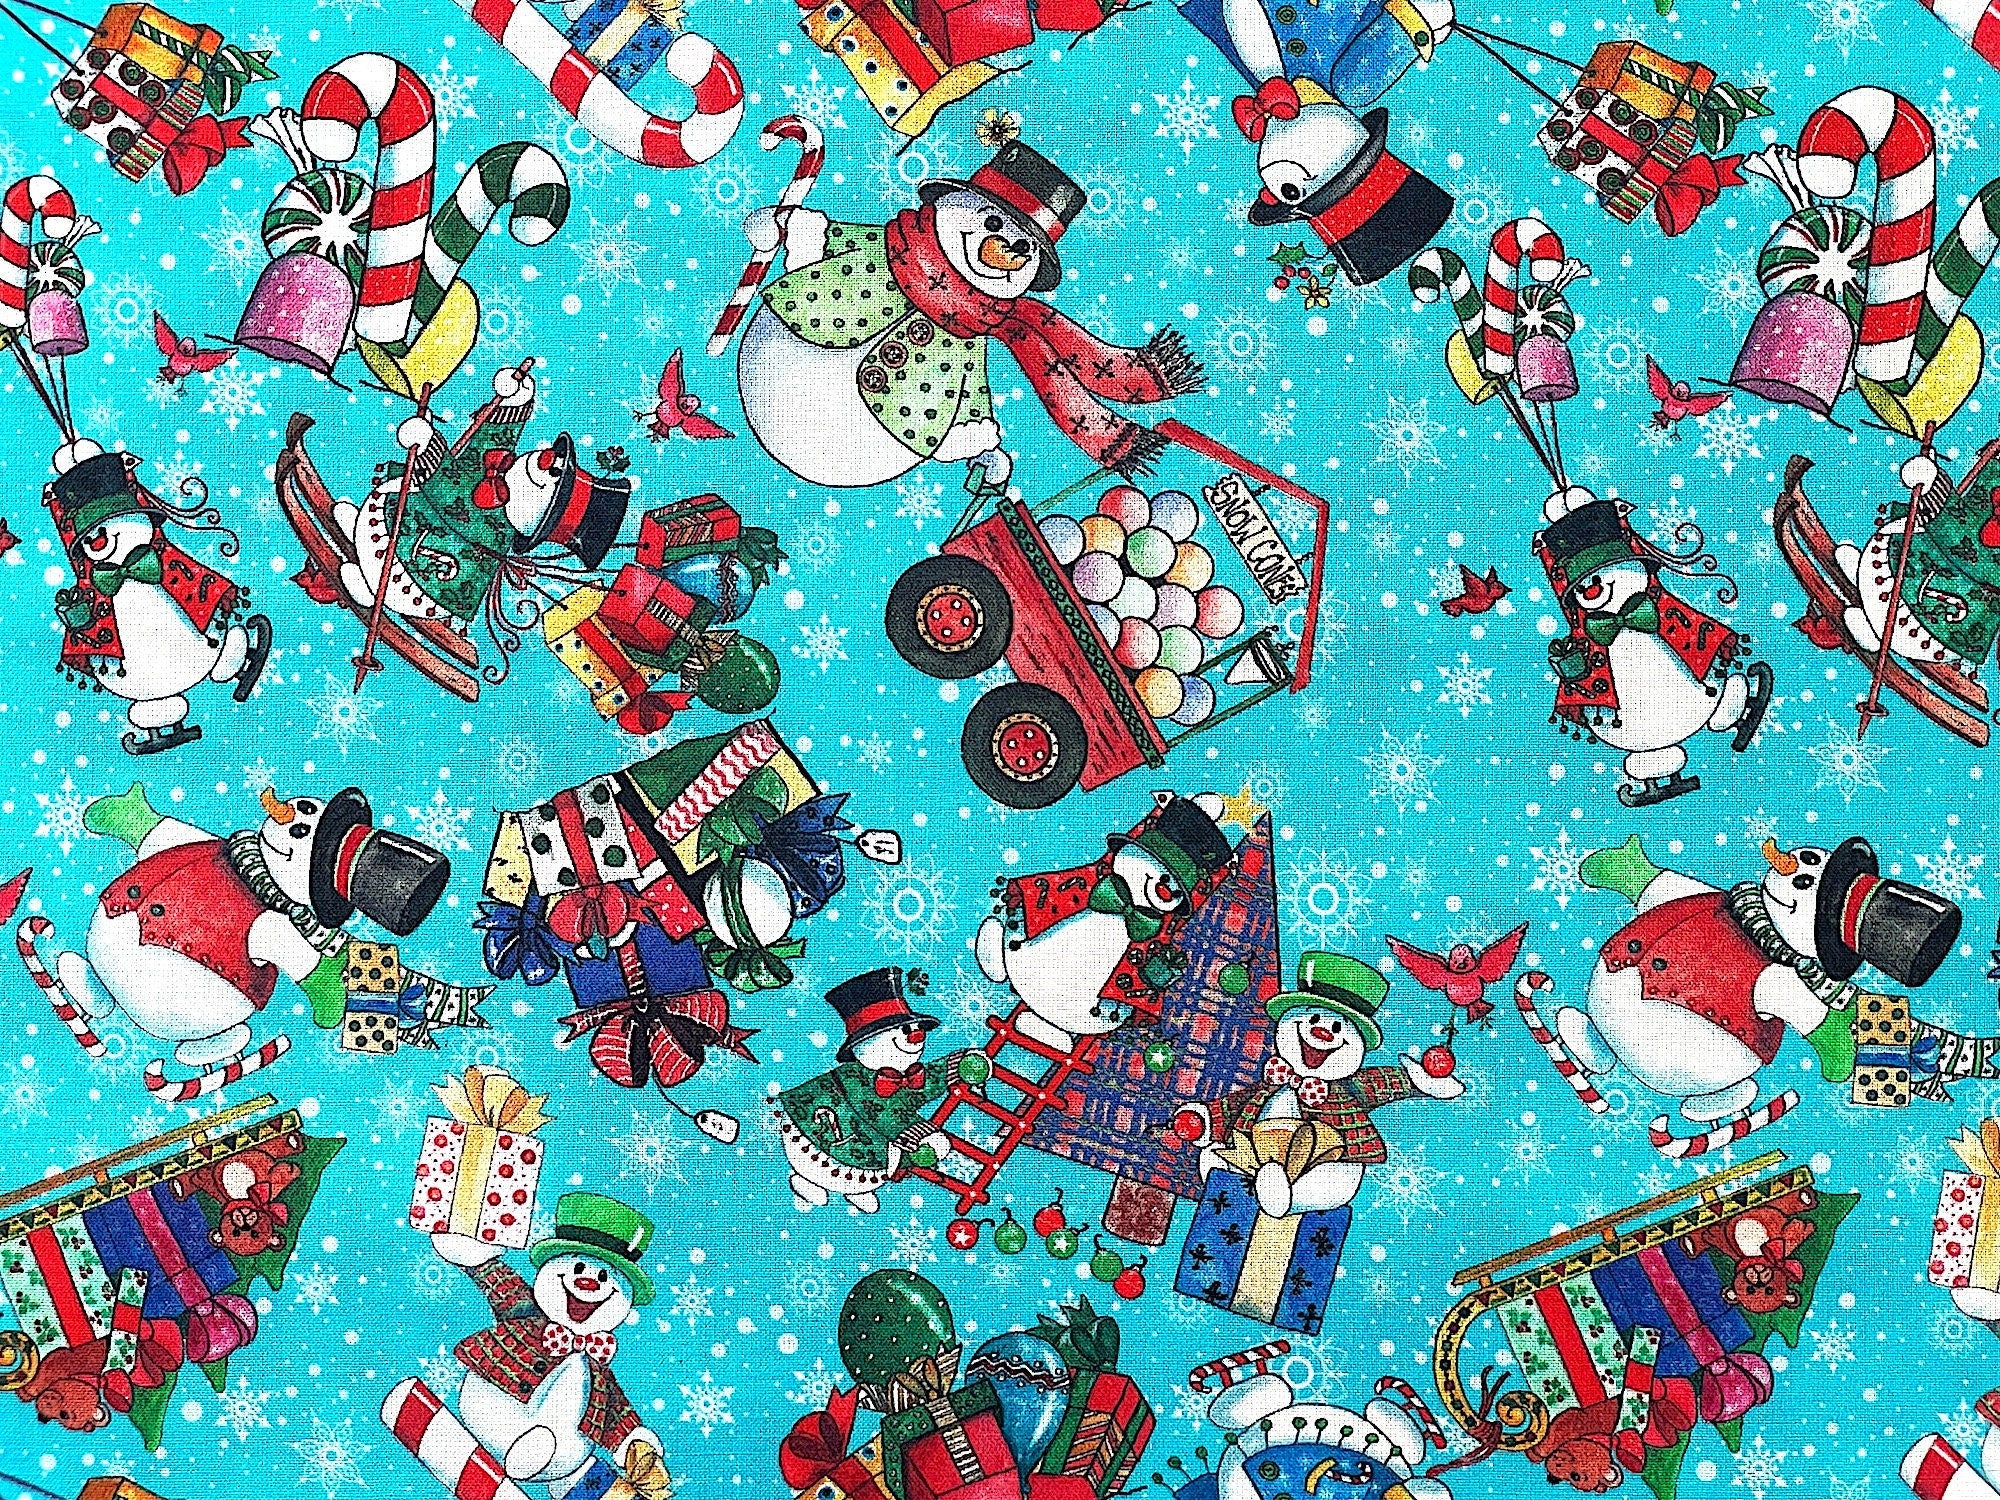 This fabric is part of the Snowman Follies collection. This blue fabric is covered with snowmen, trees, presents, candy canes and more. Some of the snowmen are decorating trees, pulling sleds, walking in candy cane skis and more.